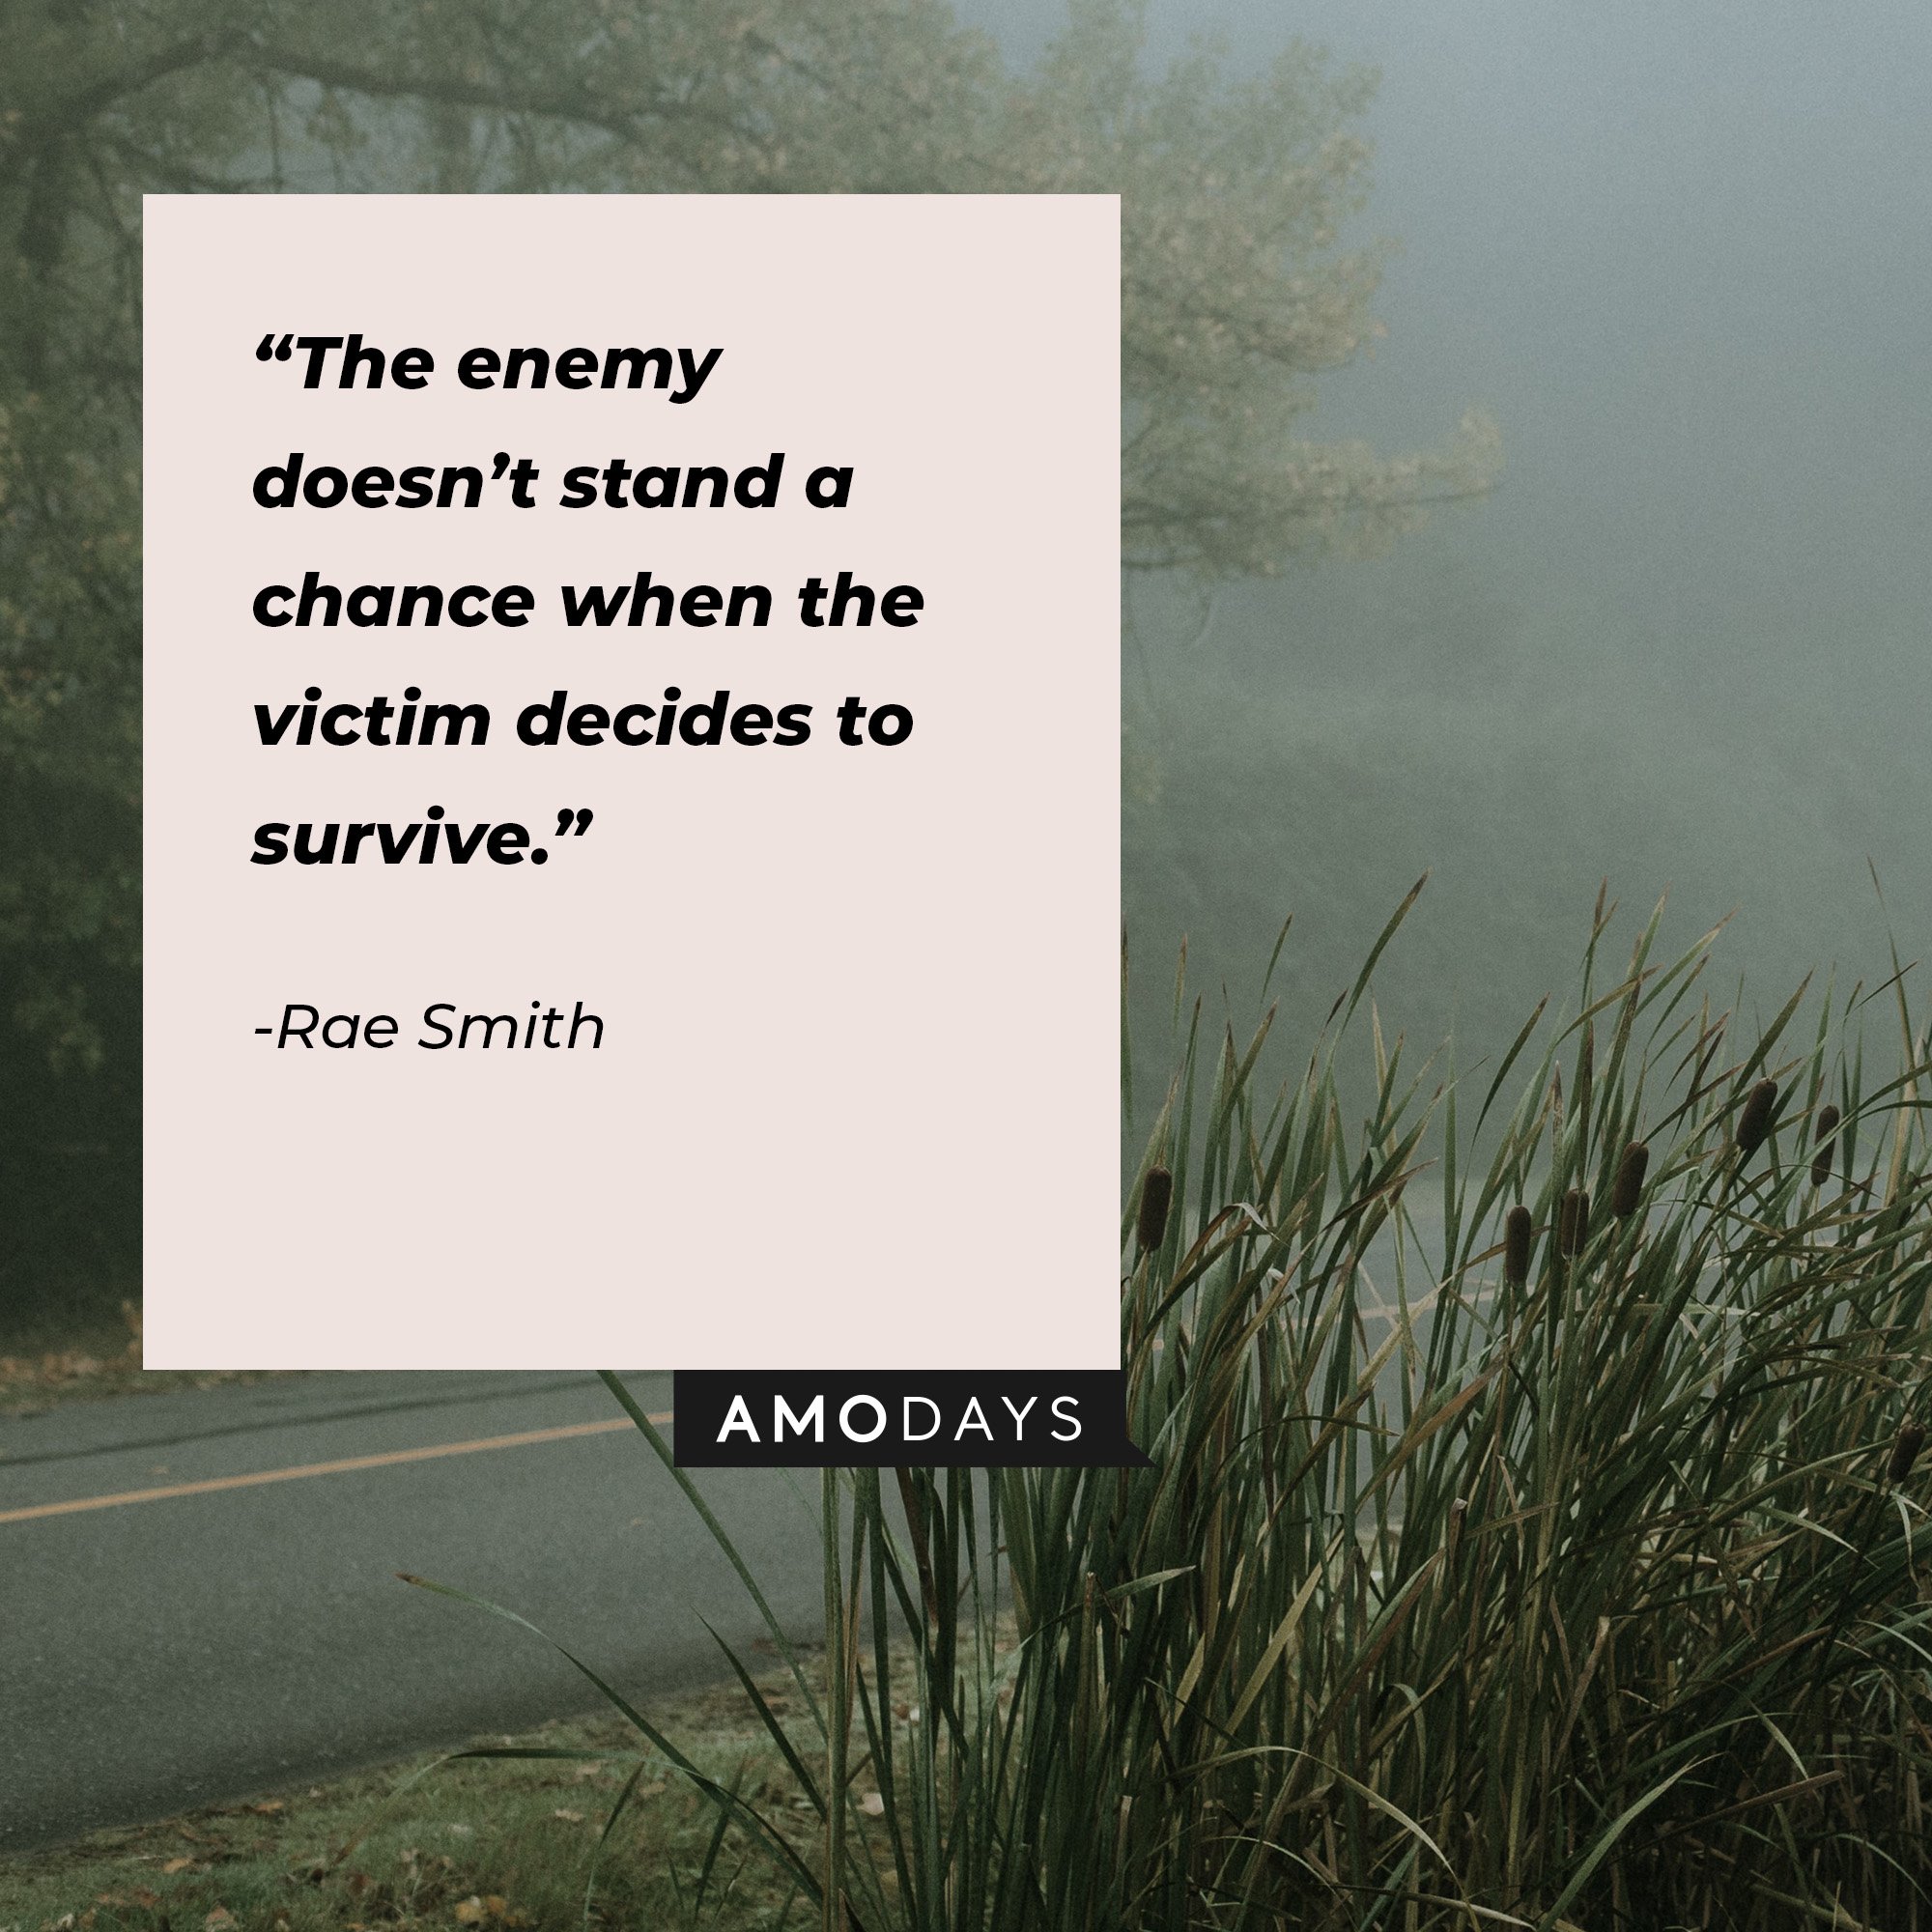 Rae Smith’s quote: “The enemy doesn’t stand a chance when the victim decides to survive.” | Image: AmoDays  